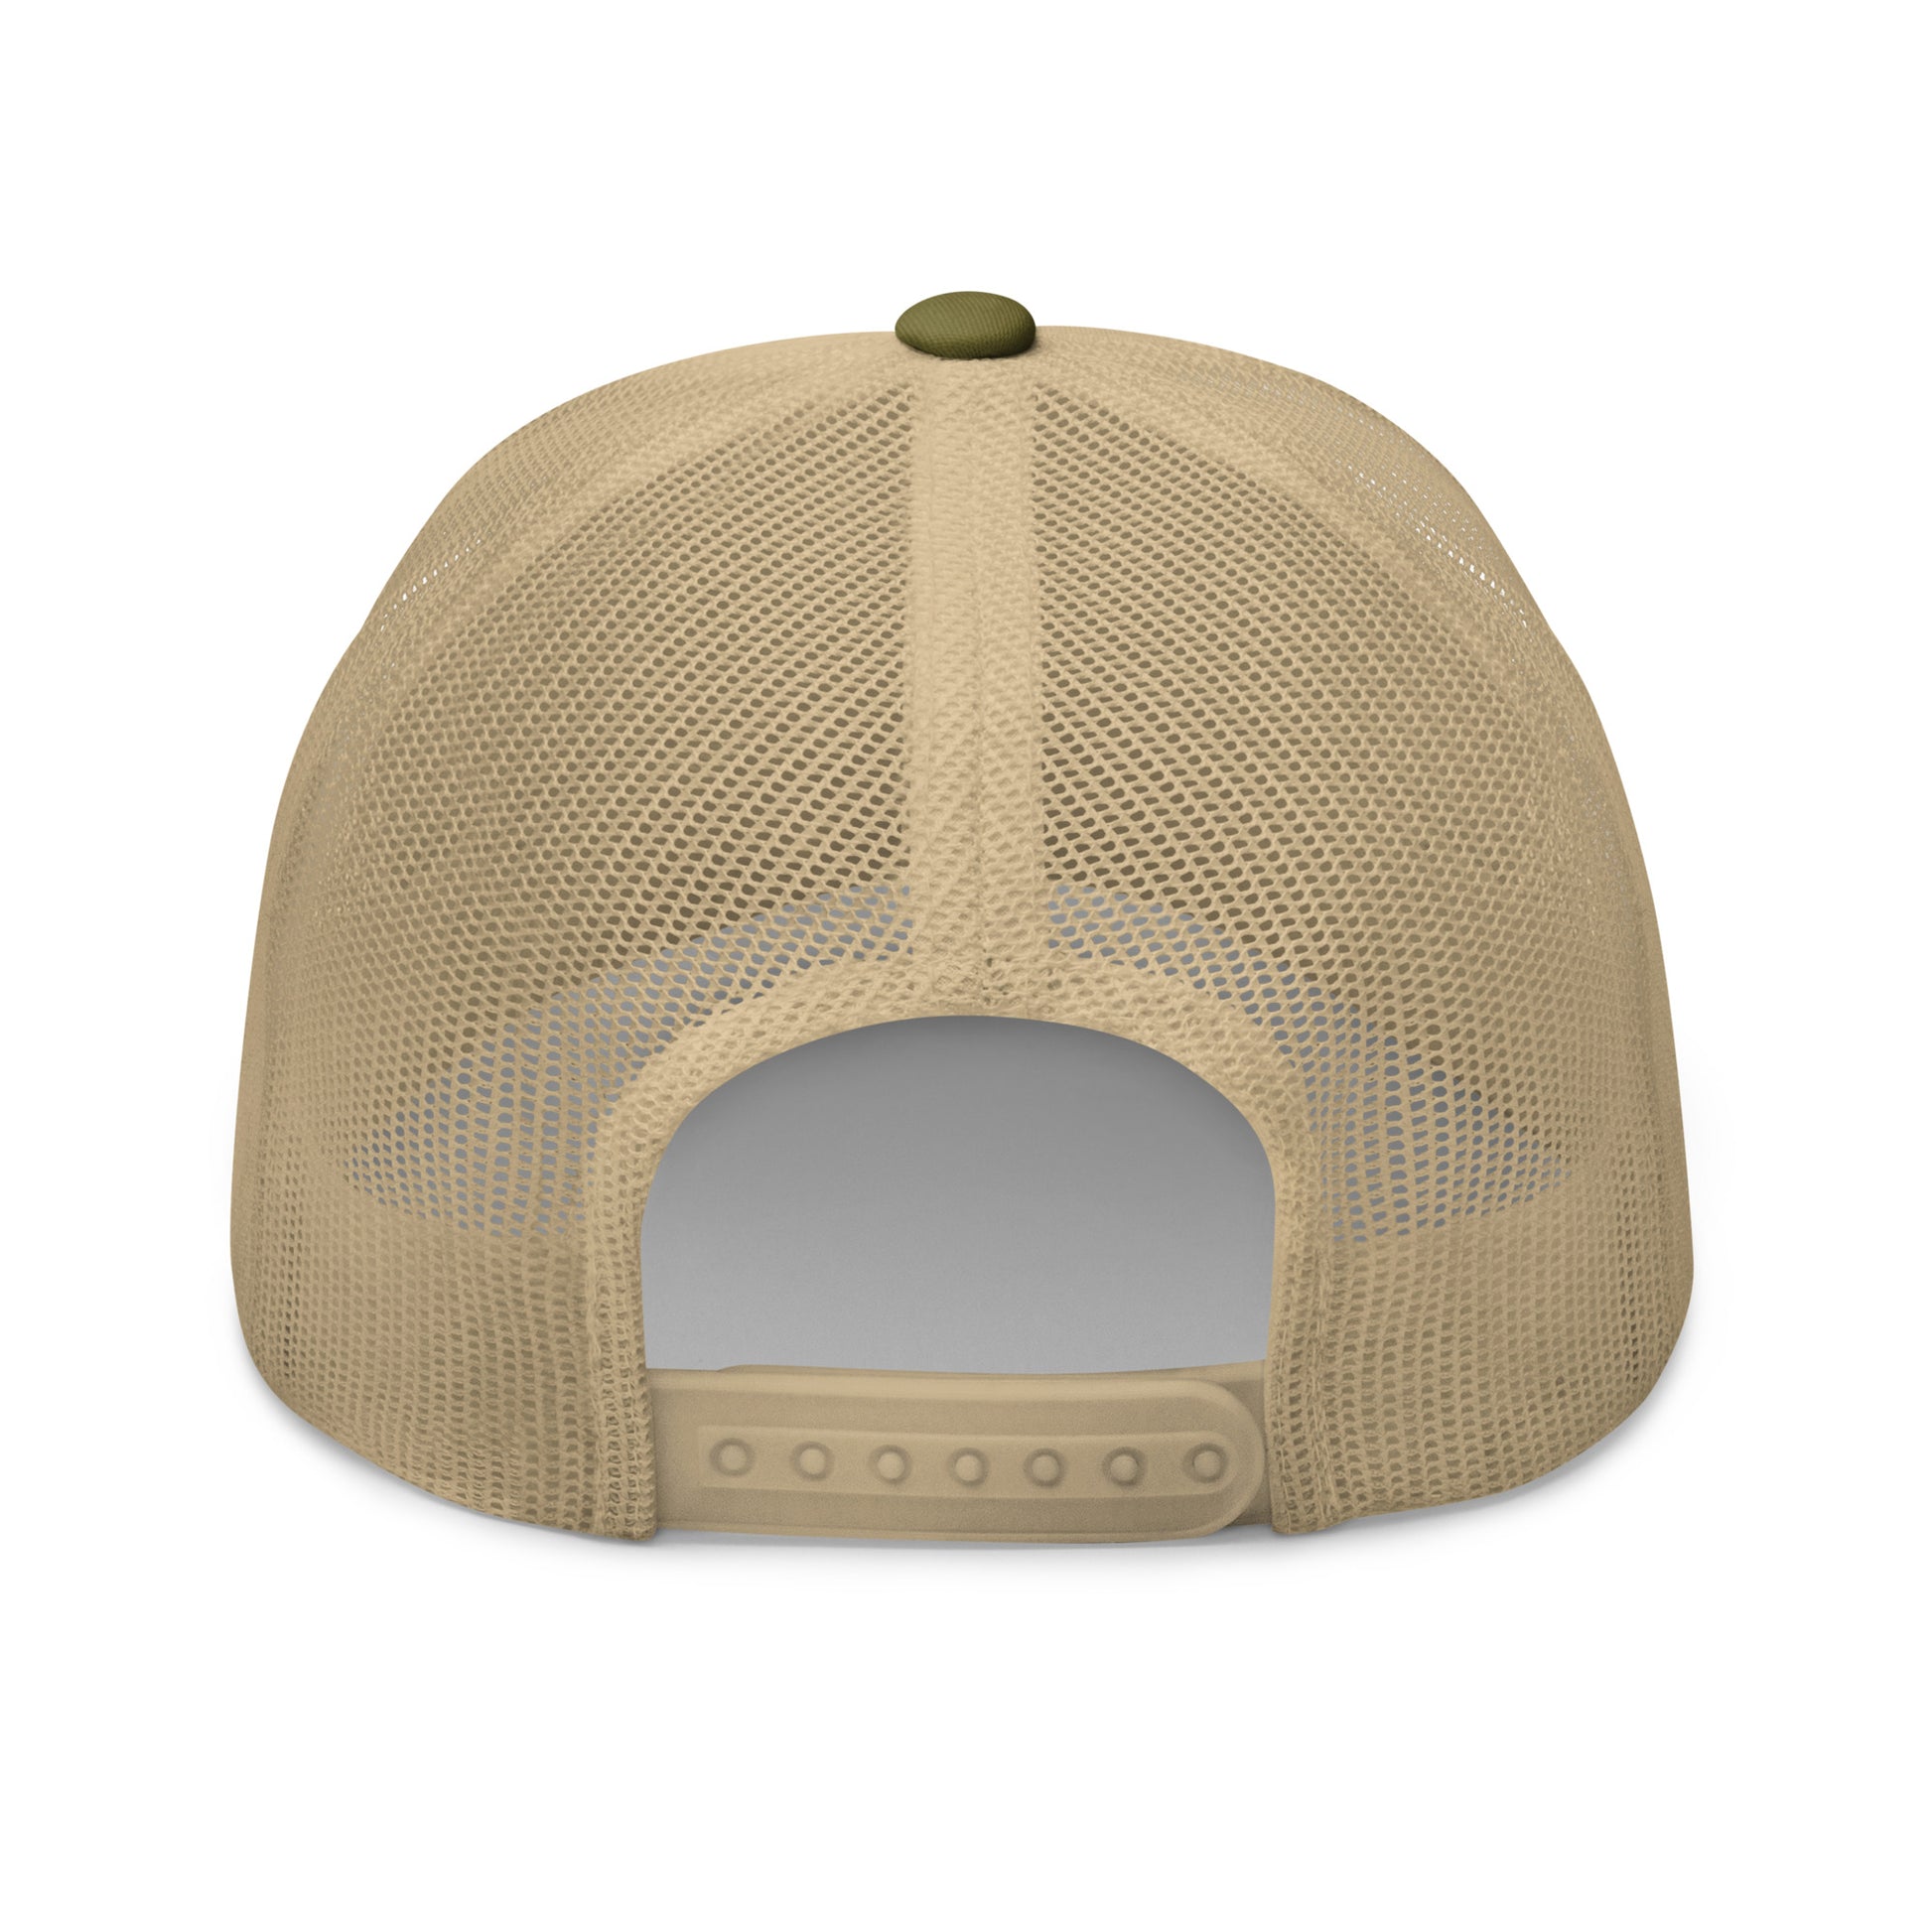 Wildfire Cigars retro trucker hat in moss and khaki facing the back